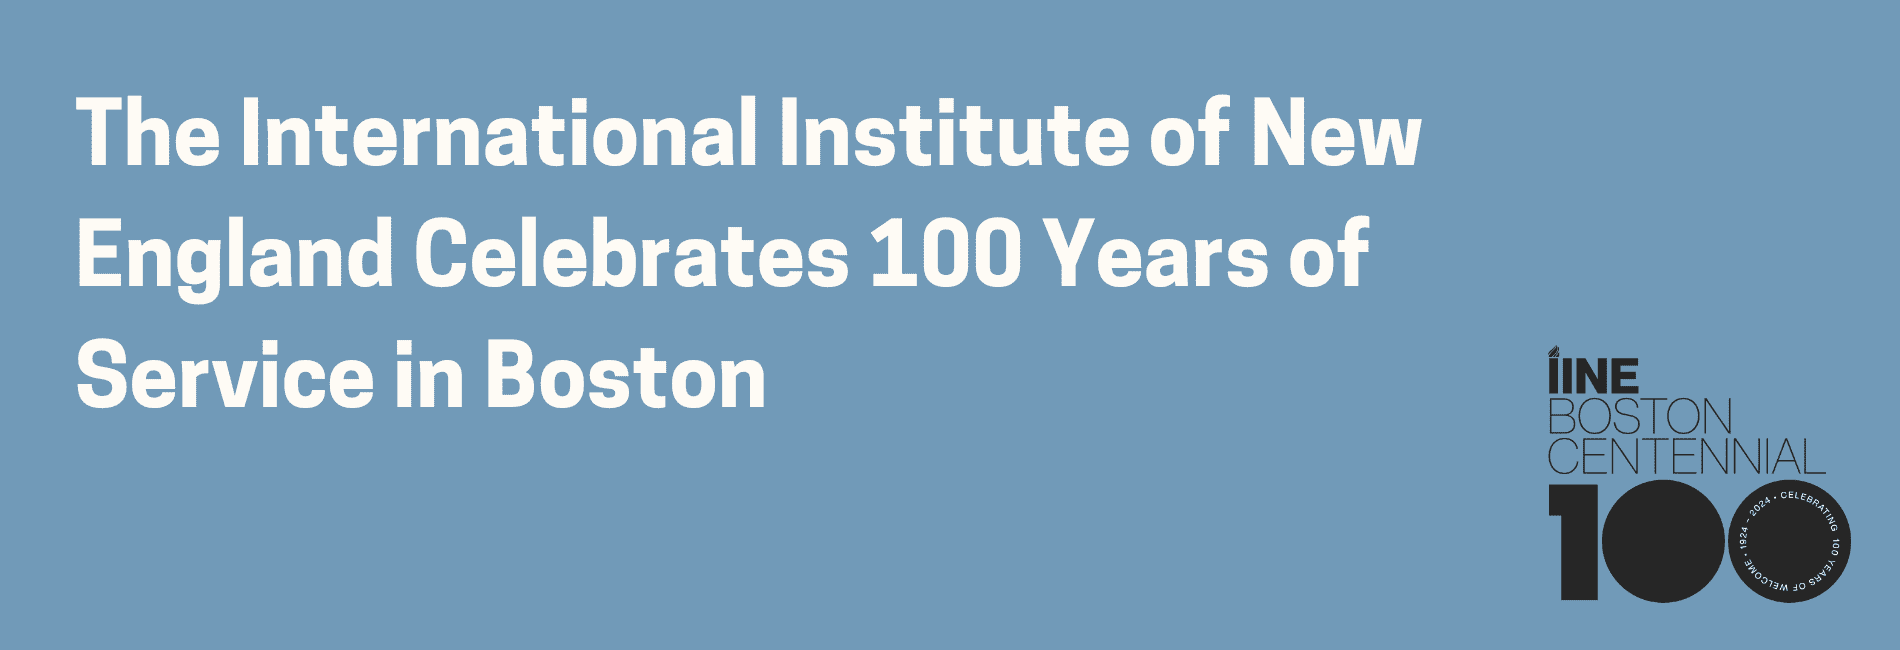 The International Institute of New England Celebrates 100 Years of Service in Boston